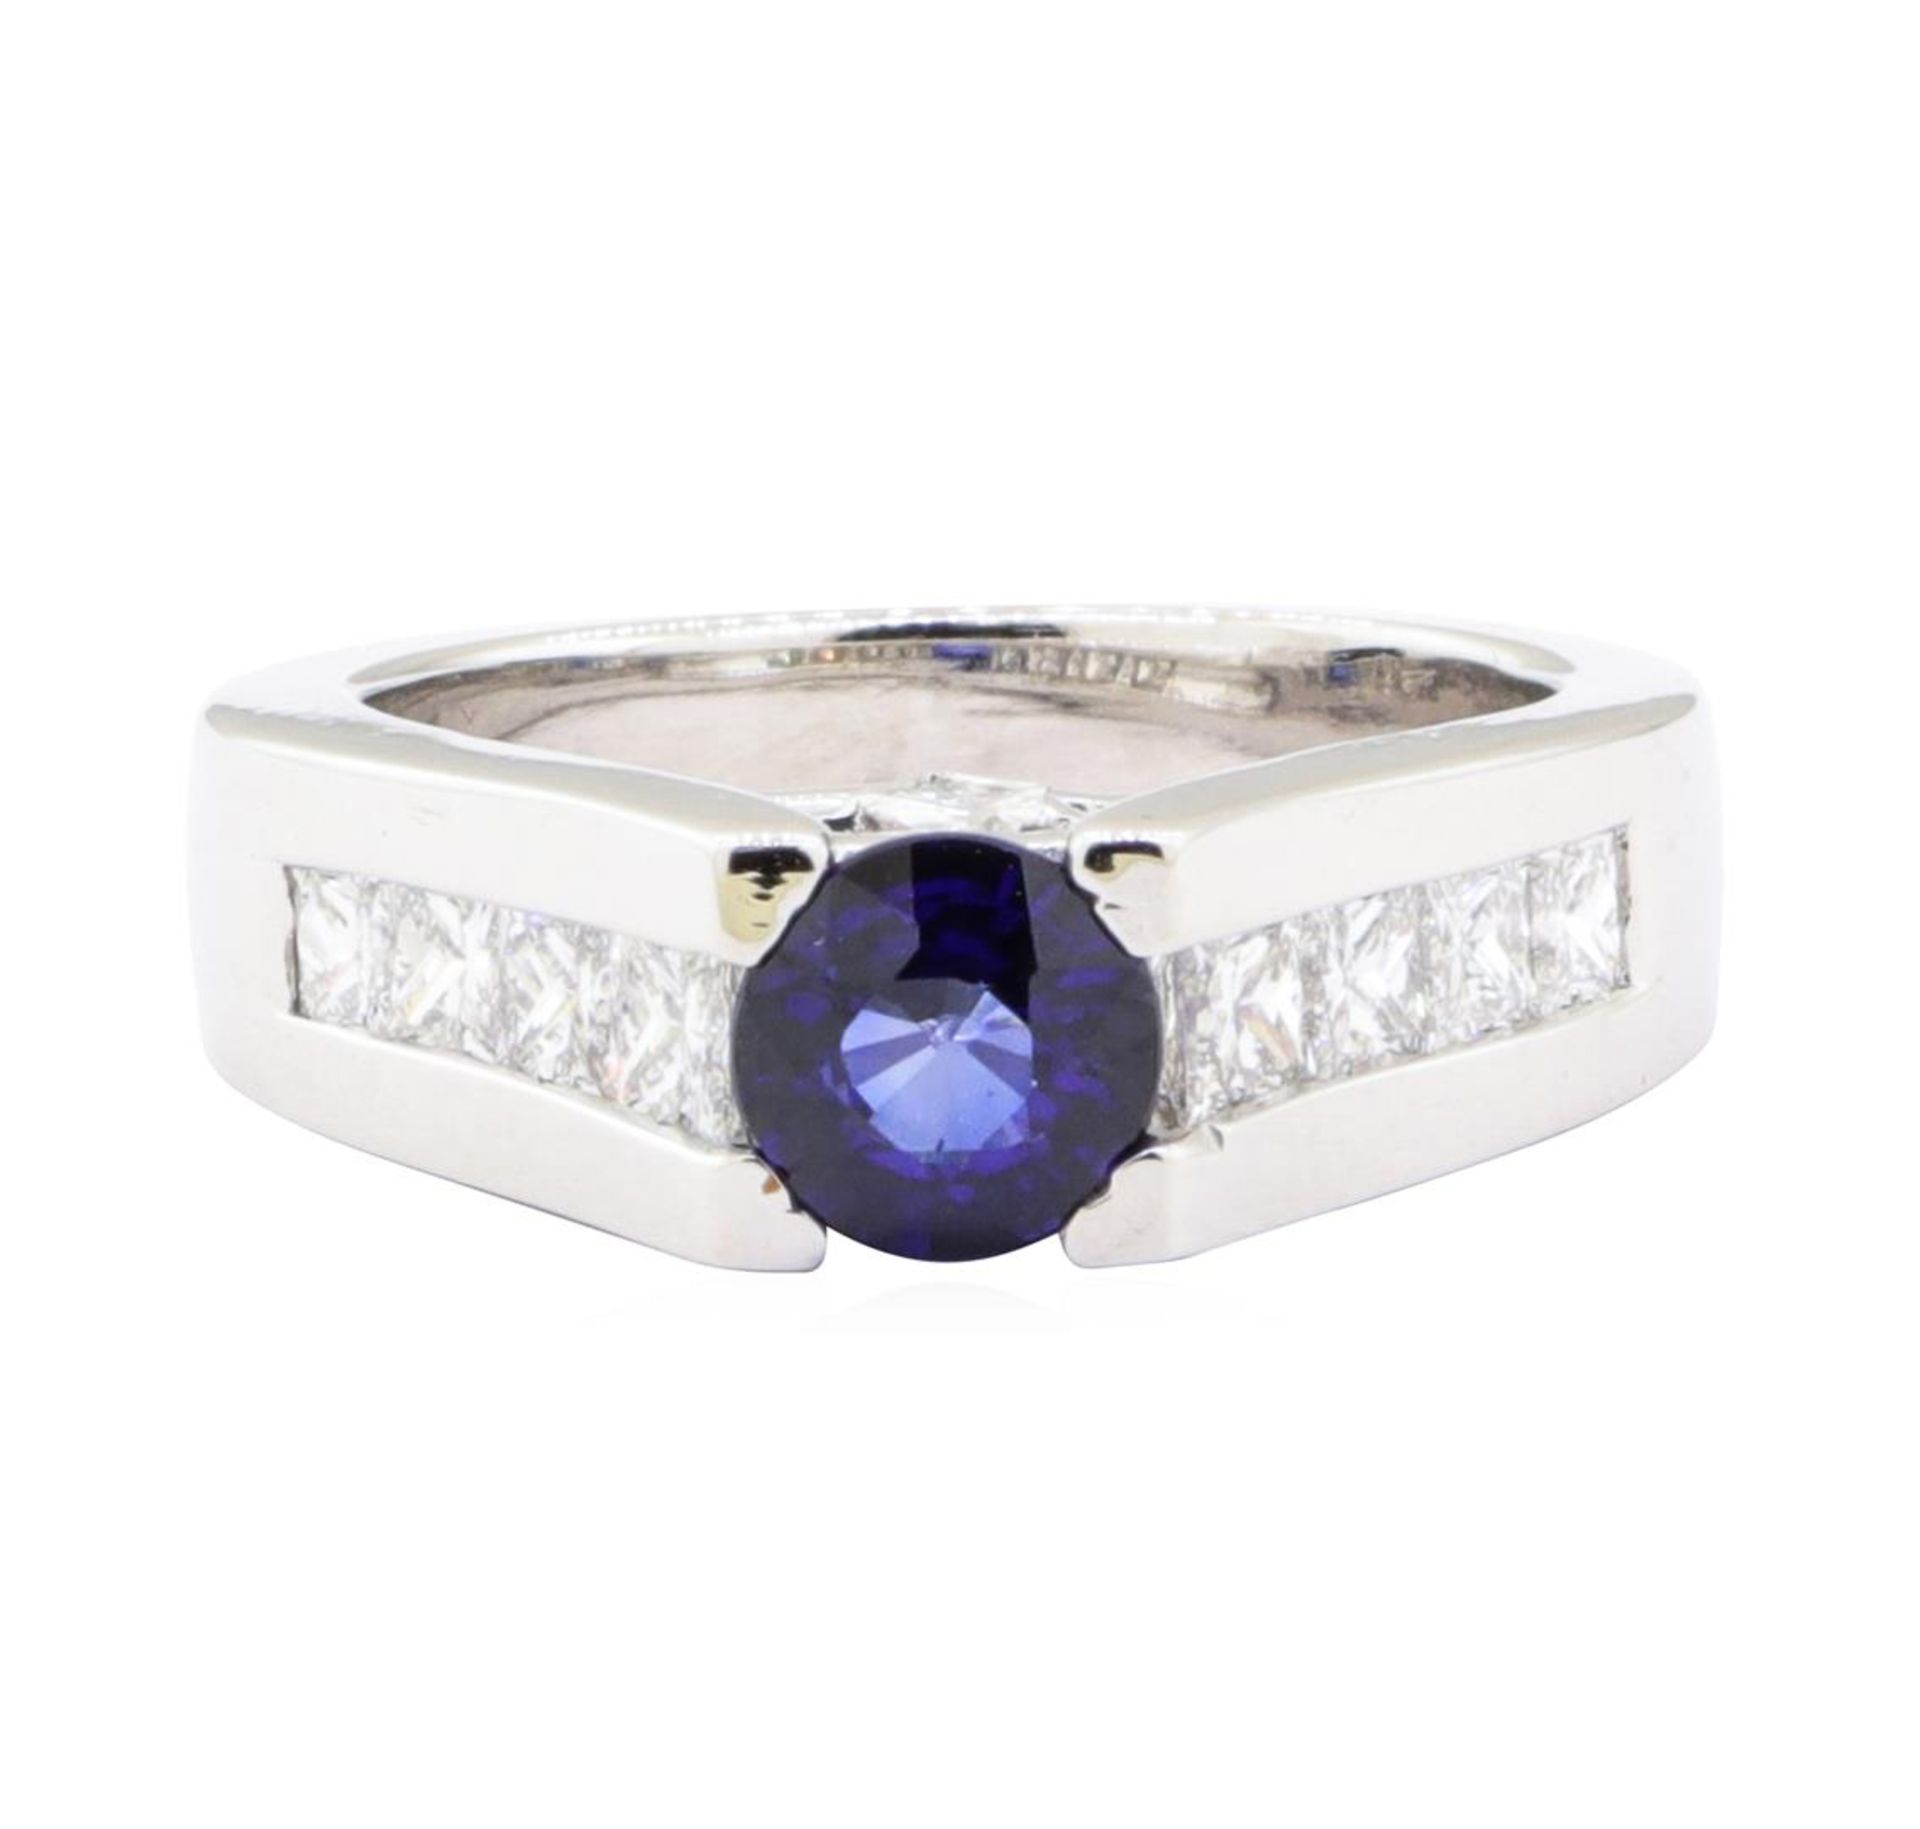 1.99 ctw Sapphire And Diamond Ring - 14KT White Gold - Image 2 of 5